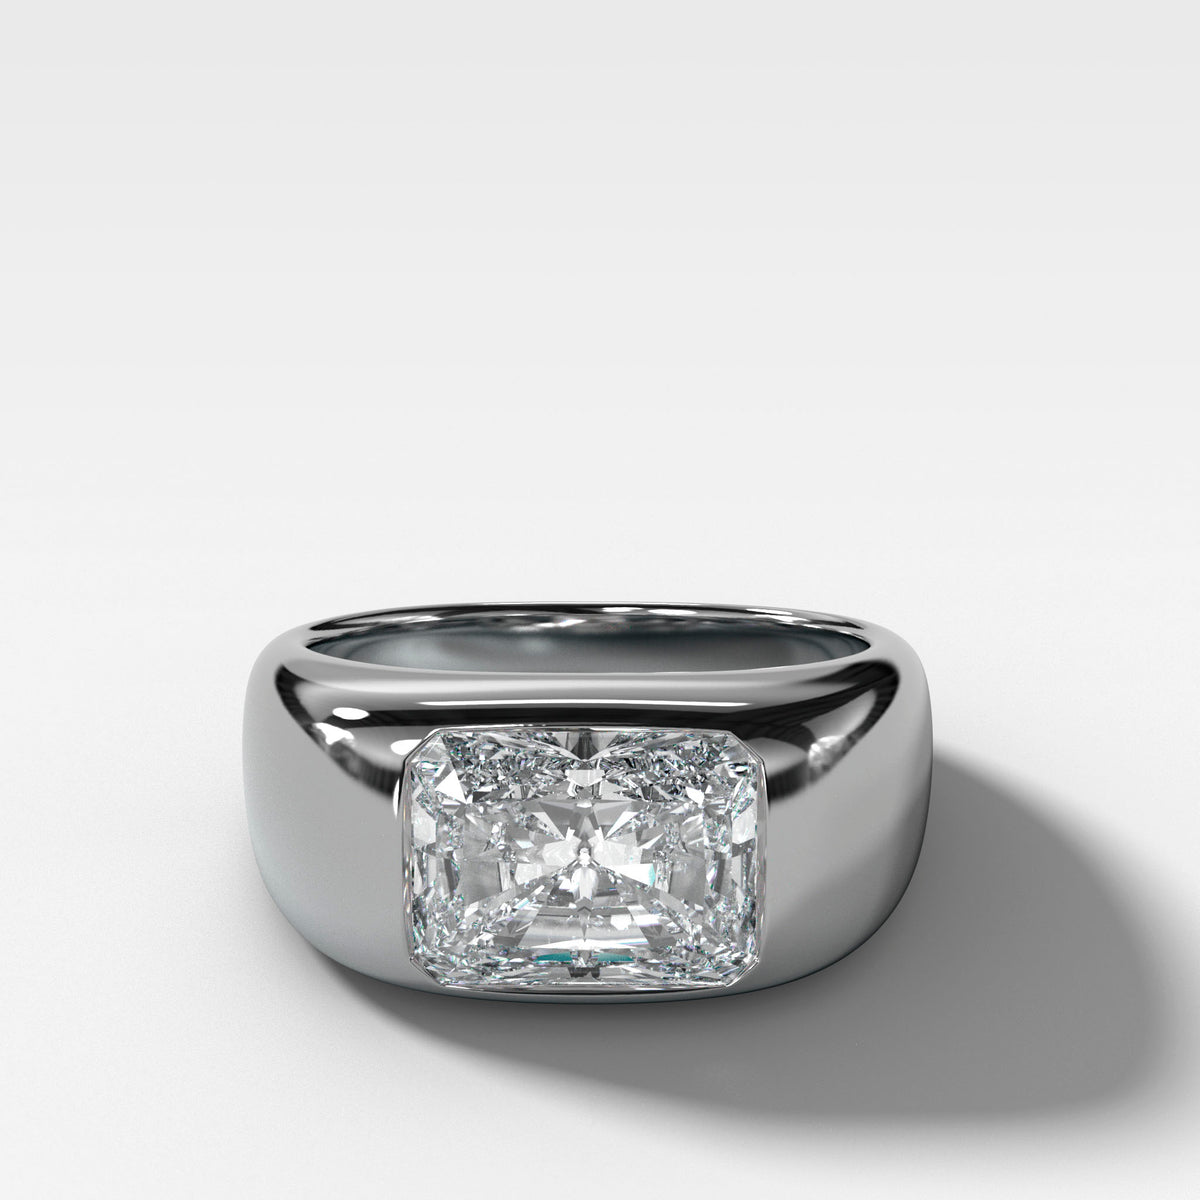 Burnished Solitaire Engagement Ring with Elongated Radiant Cut Diamond